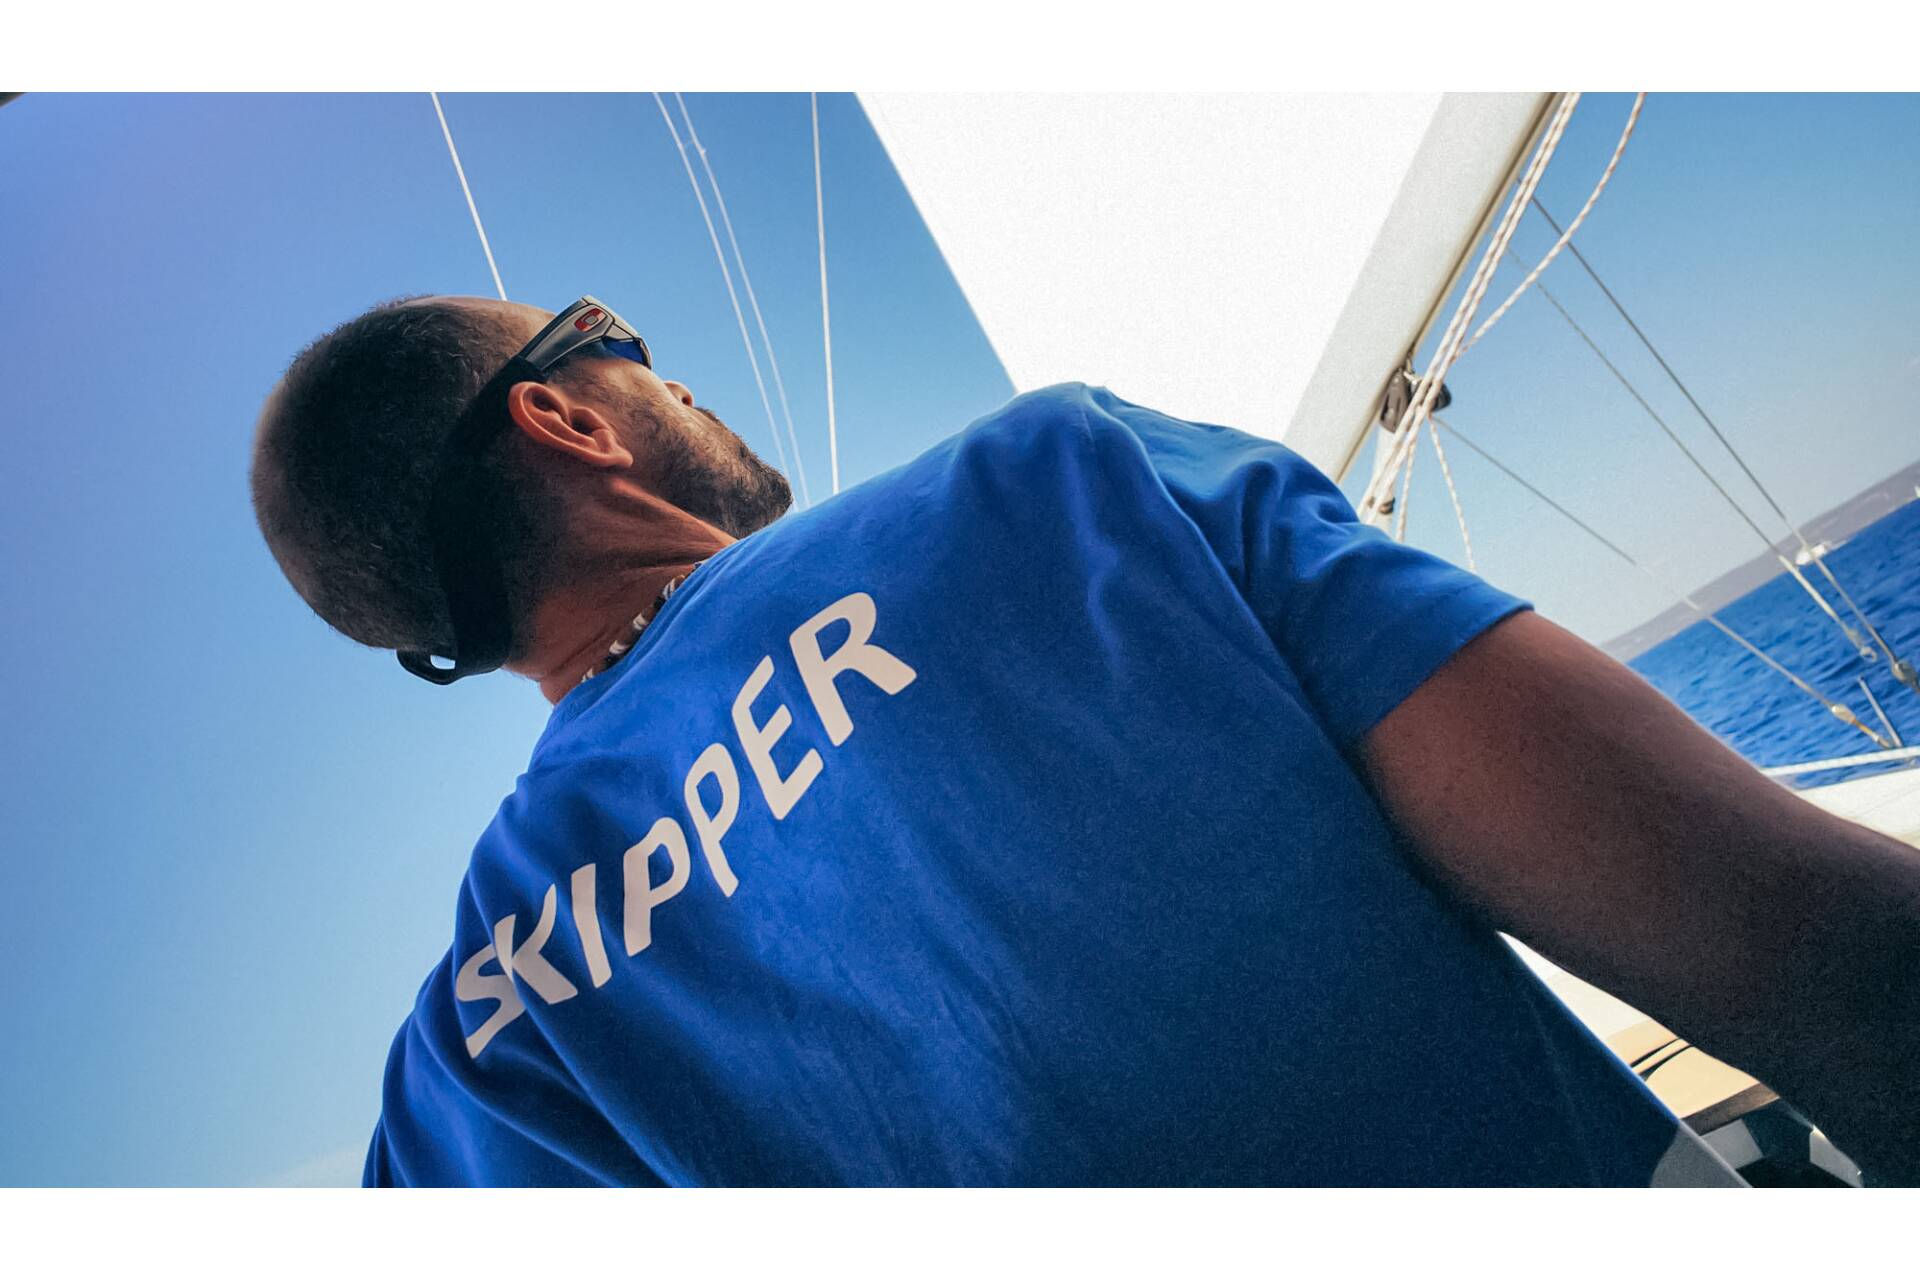 BESKIPPER: NAUTICAL TRAINING ON WATER AND ON LAND